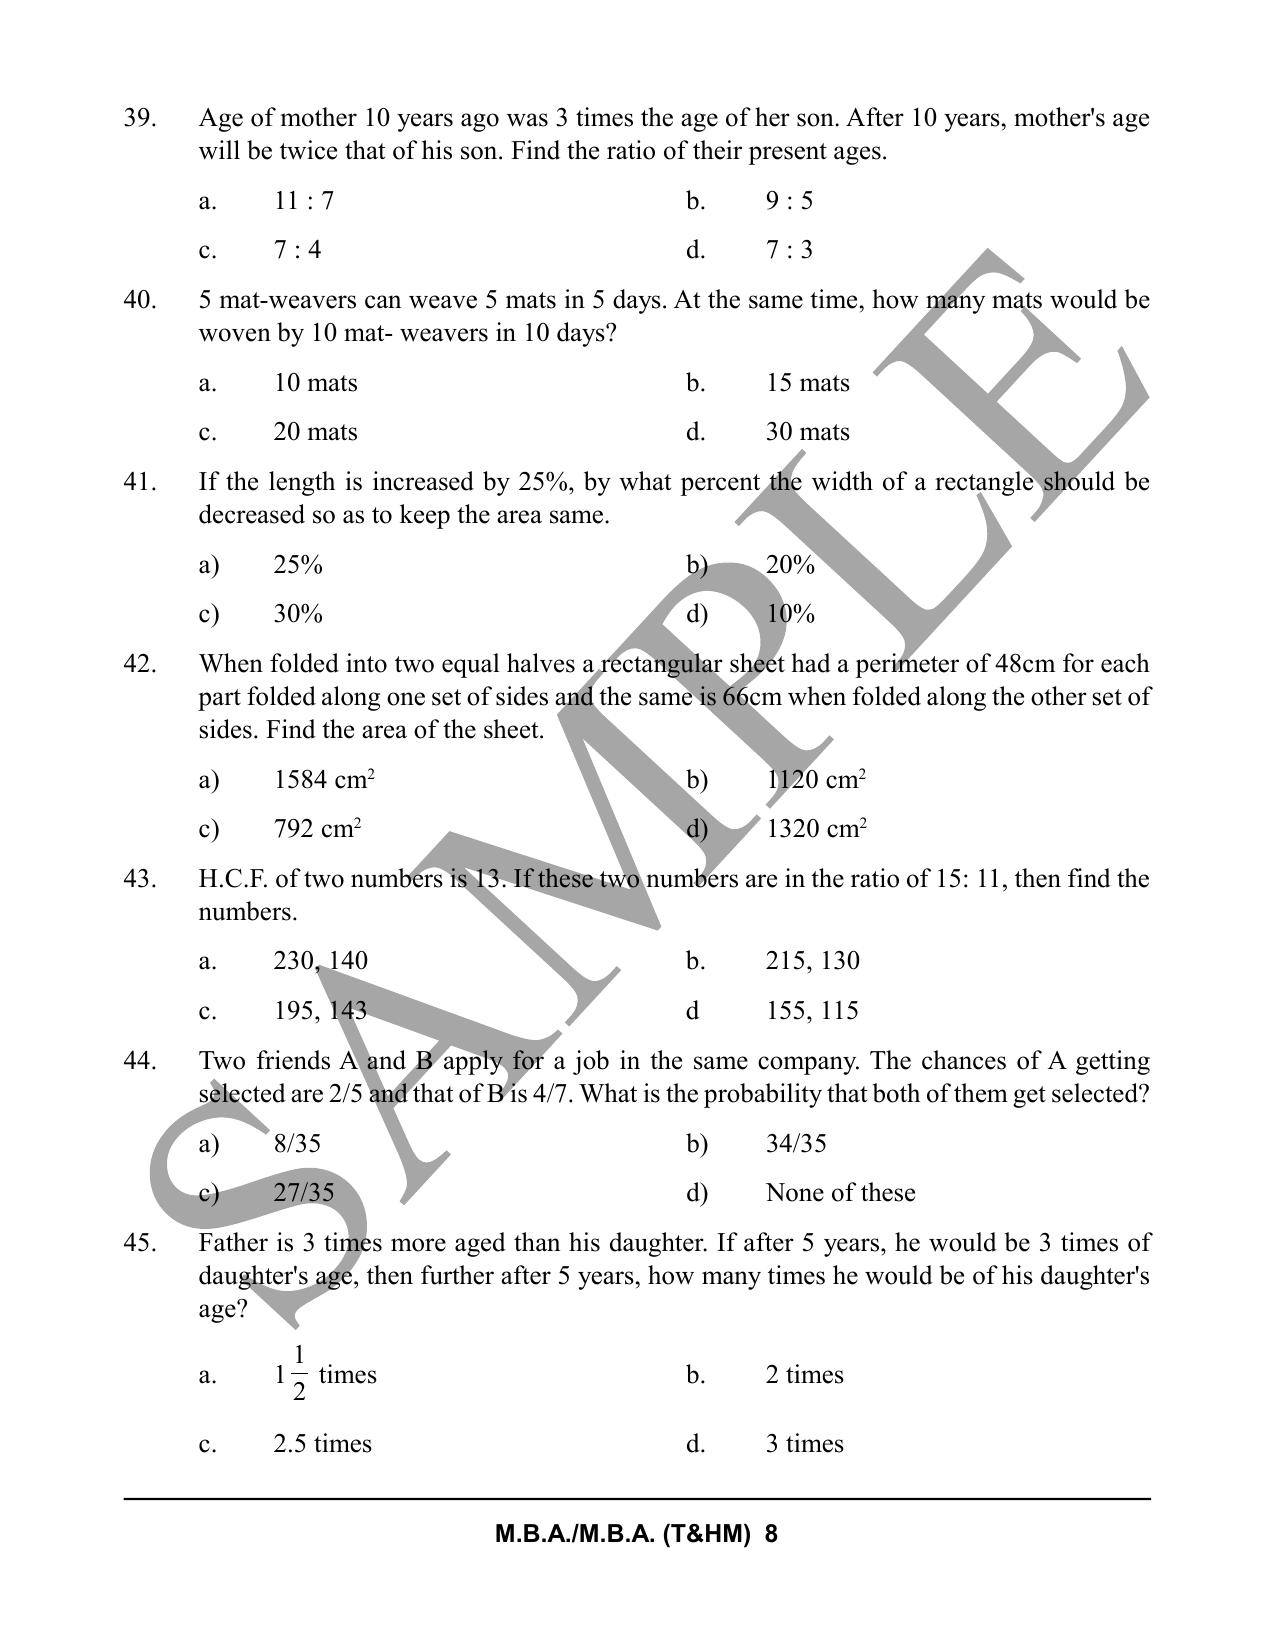 HPCET MBA and MBA (T&HM) Sample Paper 2023 Sample Paper - Page 8